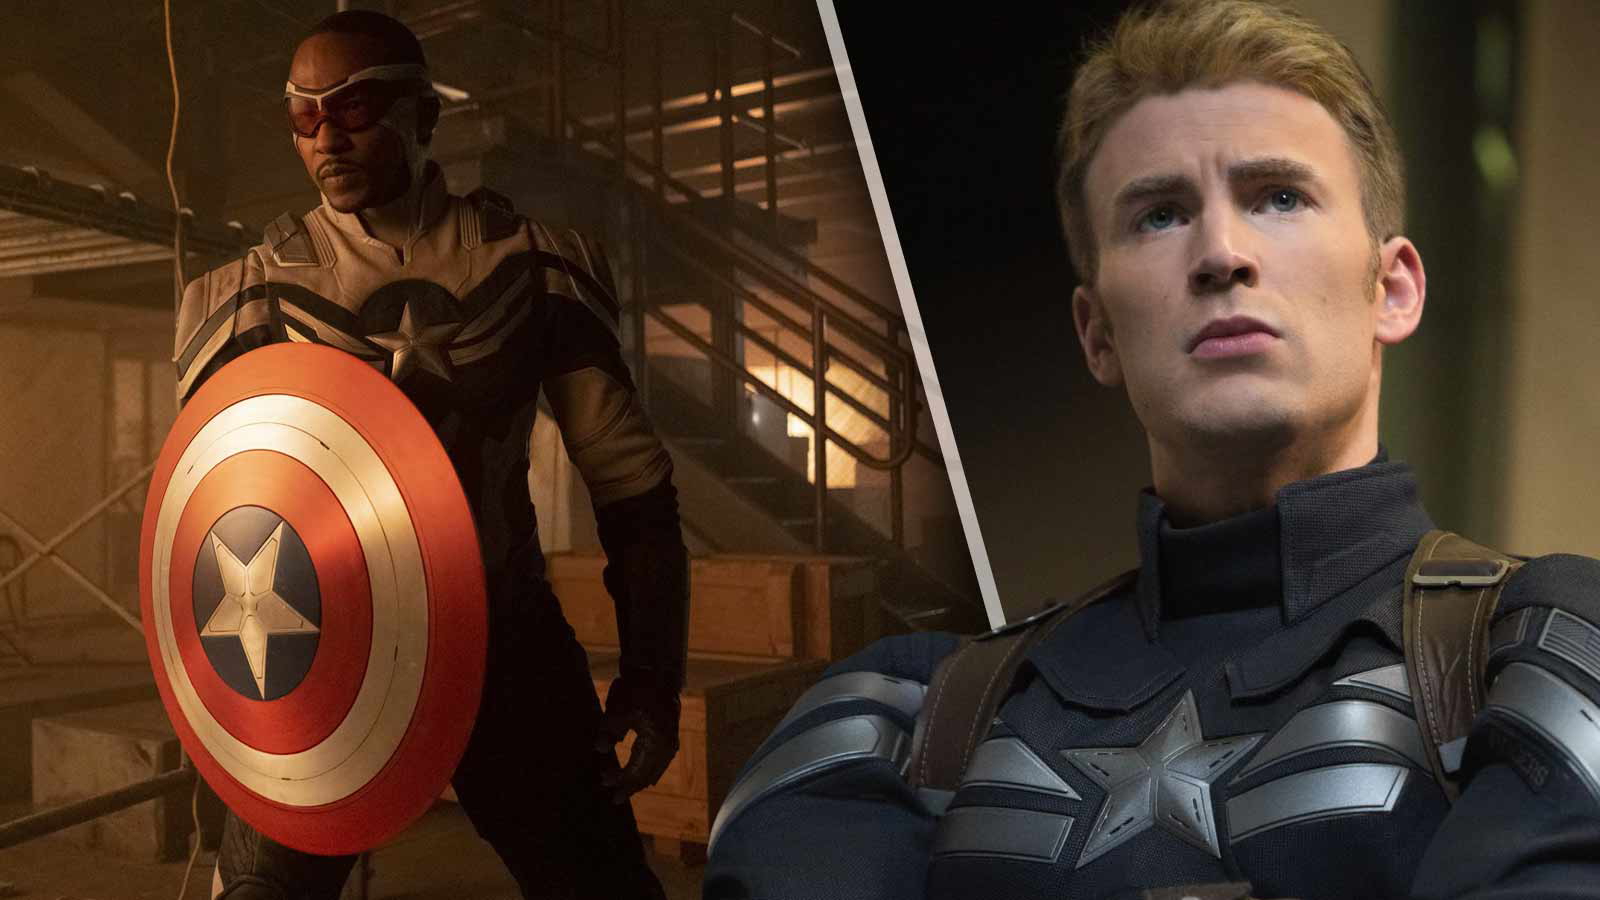 “We text all the time”: Chris Evans’ Honest Feelings About Passing the Mantle to Anthony Mackie in Captain America: Brave New World Still Won’t Change Fans’ Minds